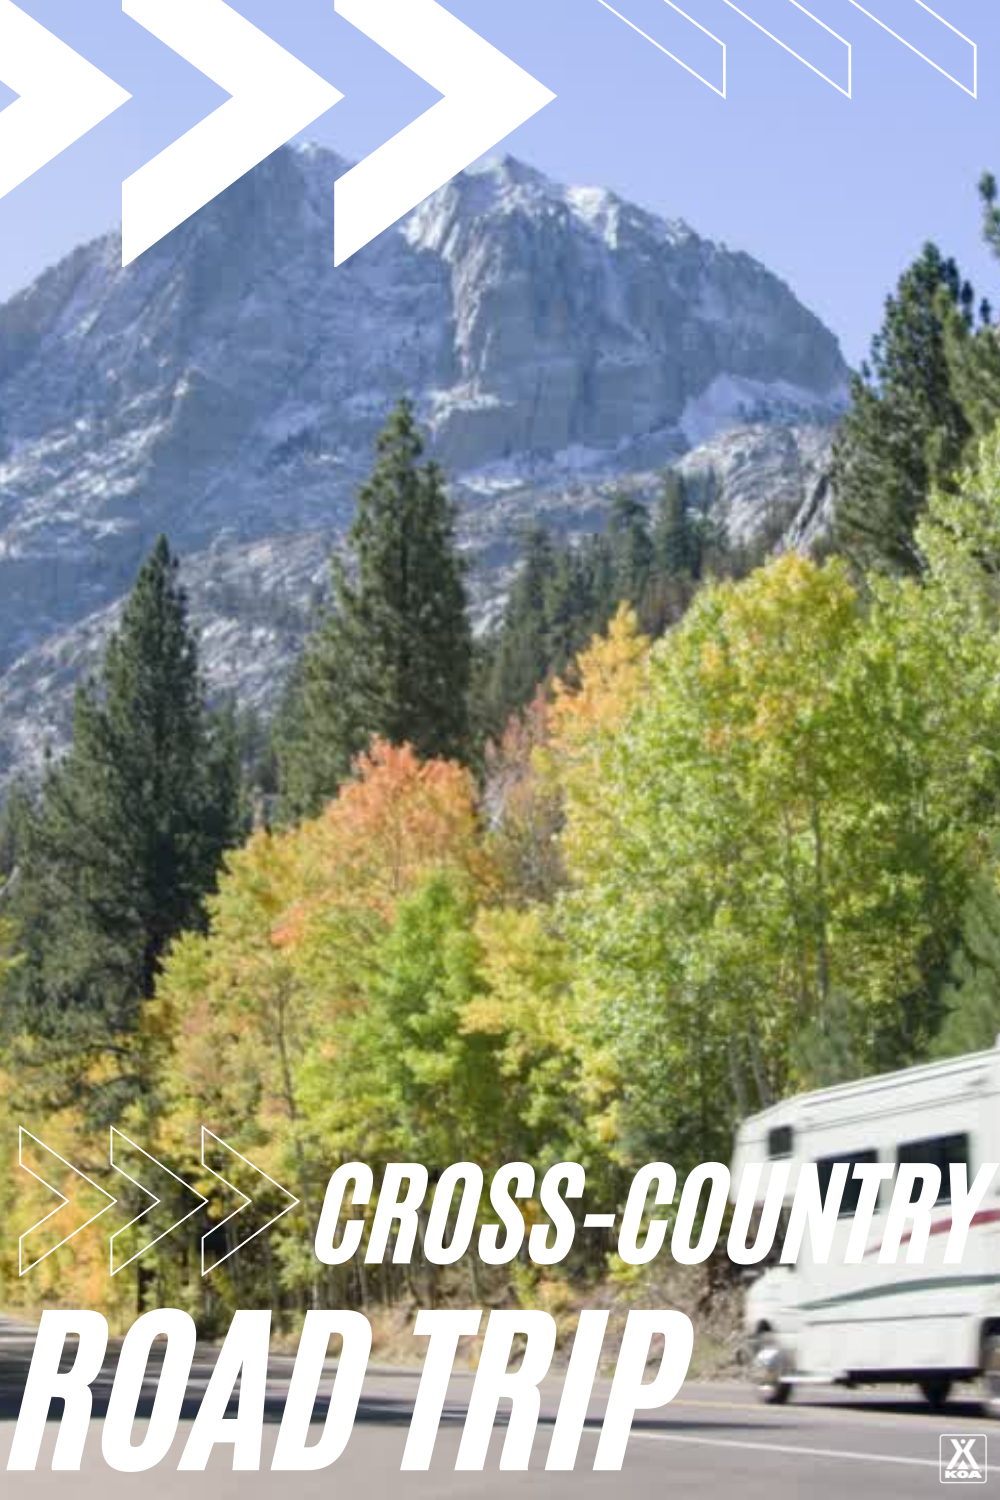 Looking to plan an epic, cross-country road trip? Use these tips and tricks to plan your cross-country road trip adventure.